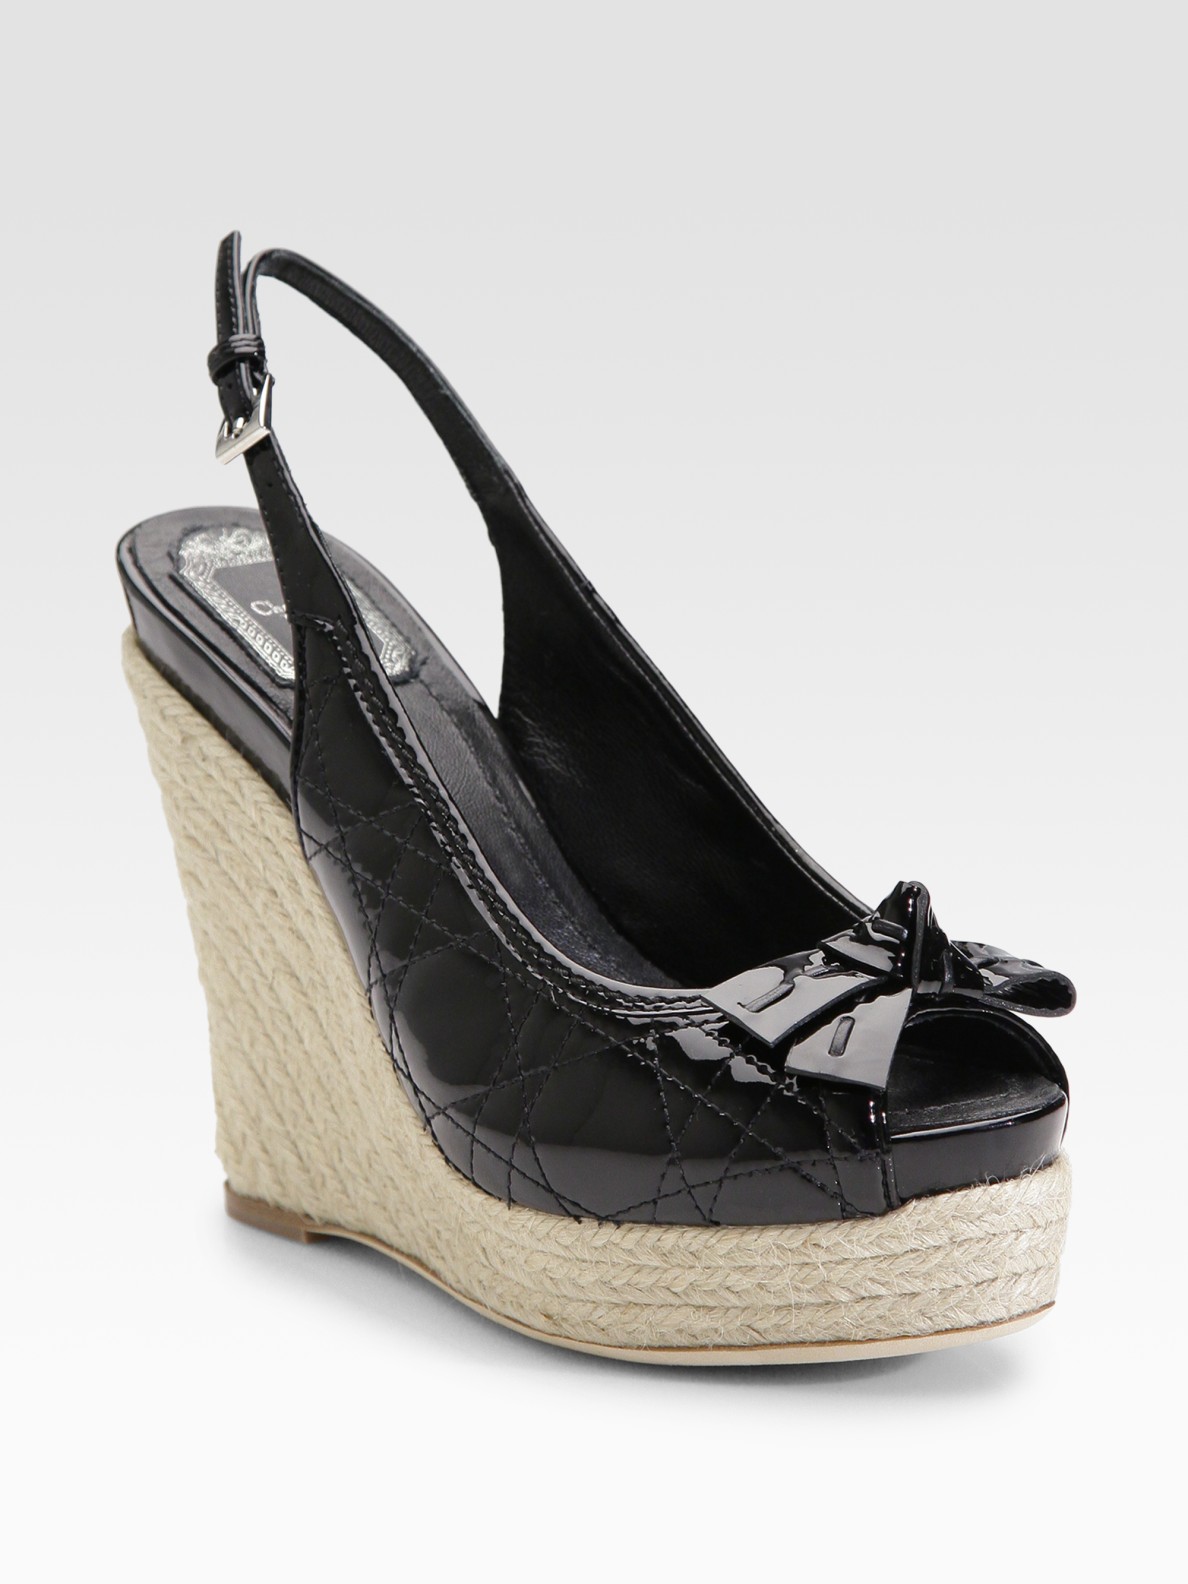 Lyst - Dior Cannage Ribbon Patent Wedge Sandals in Black